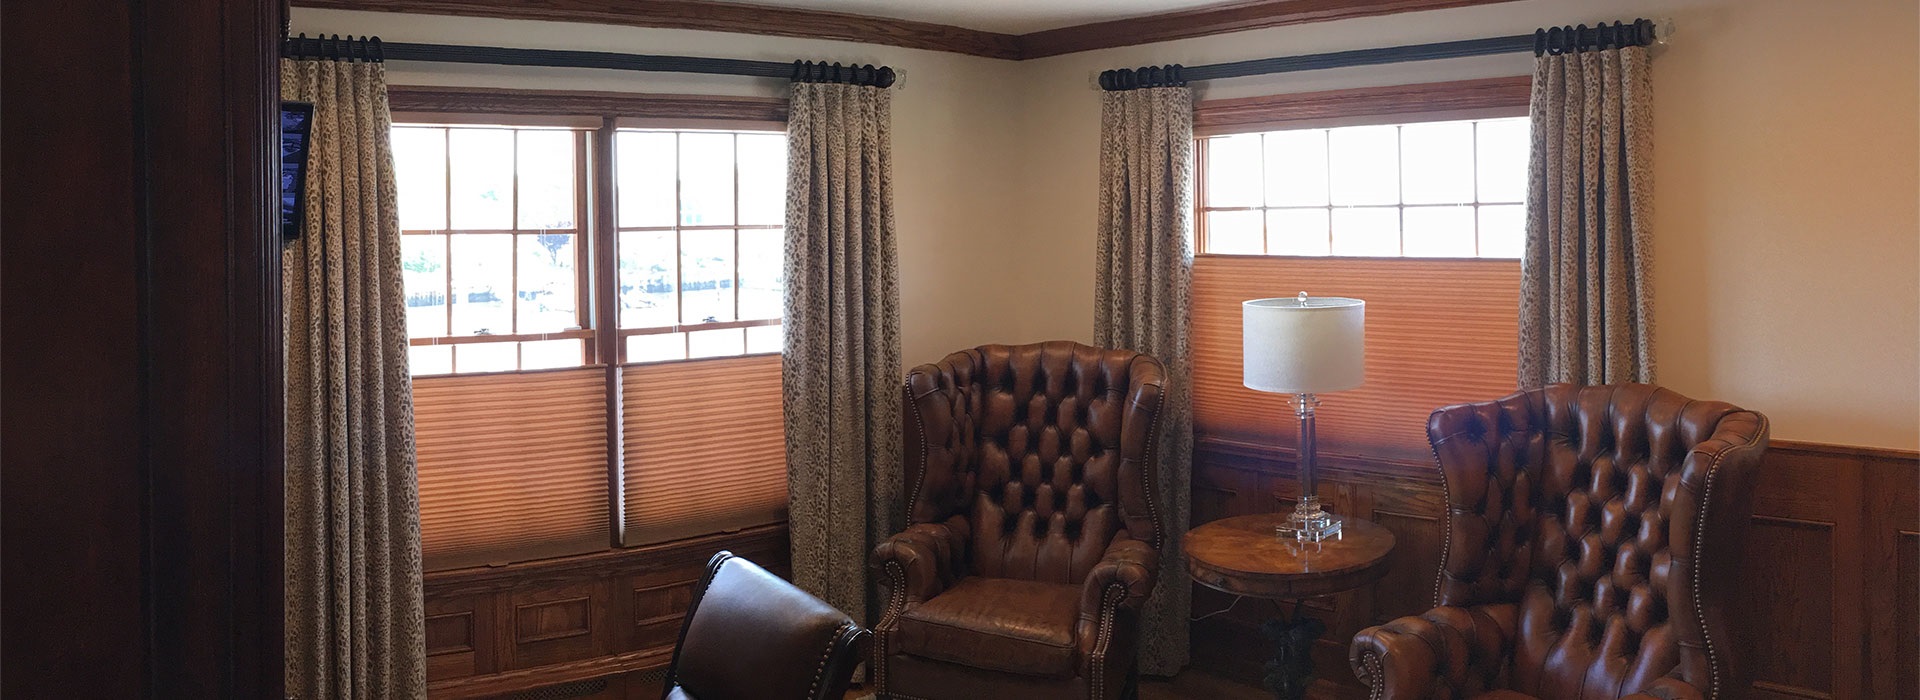 Home interior with light brown drapes